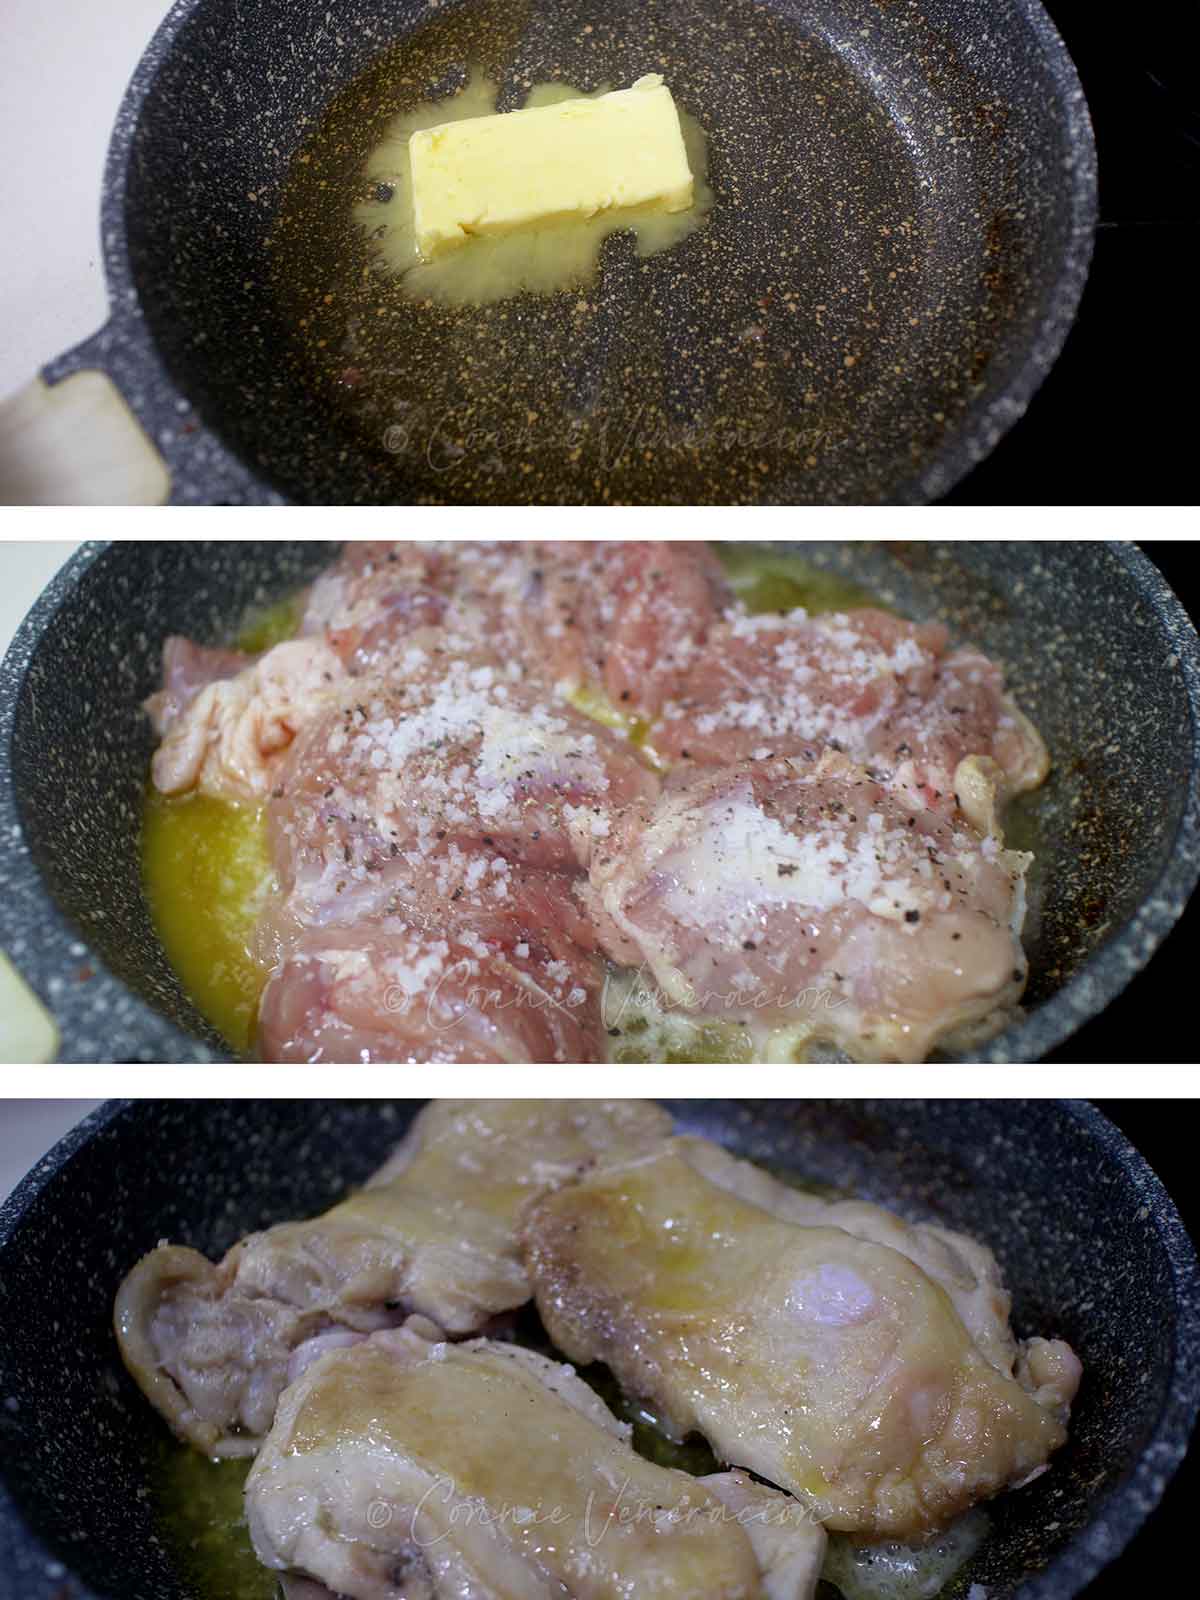 Cooking chicken in butter, and bacon and sausage drippings